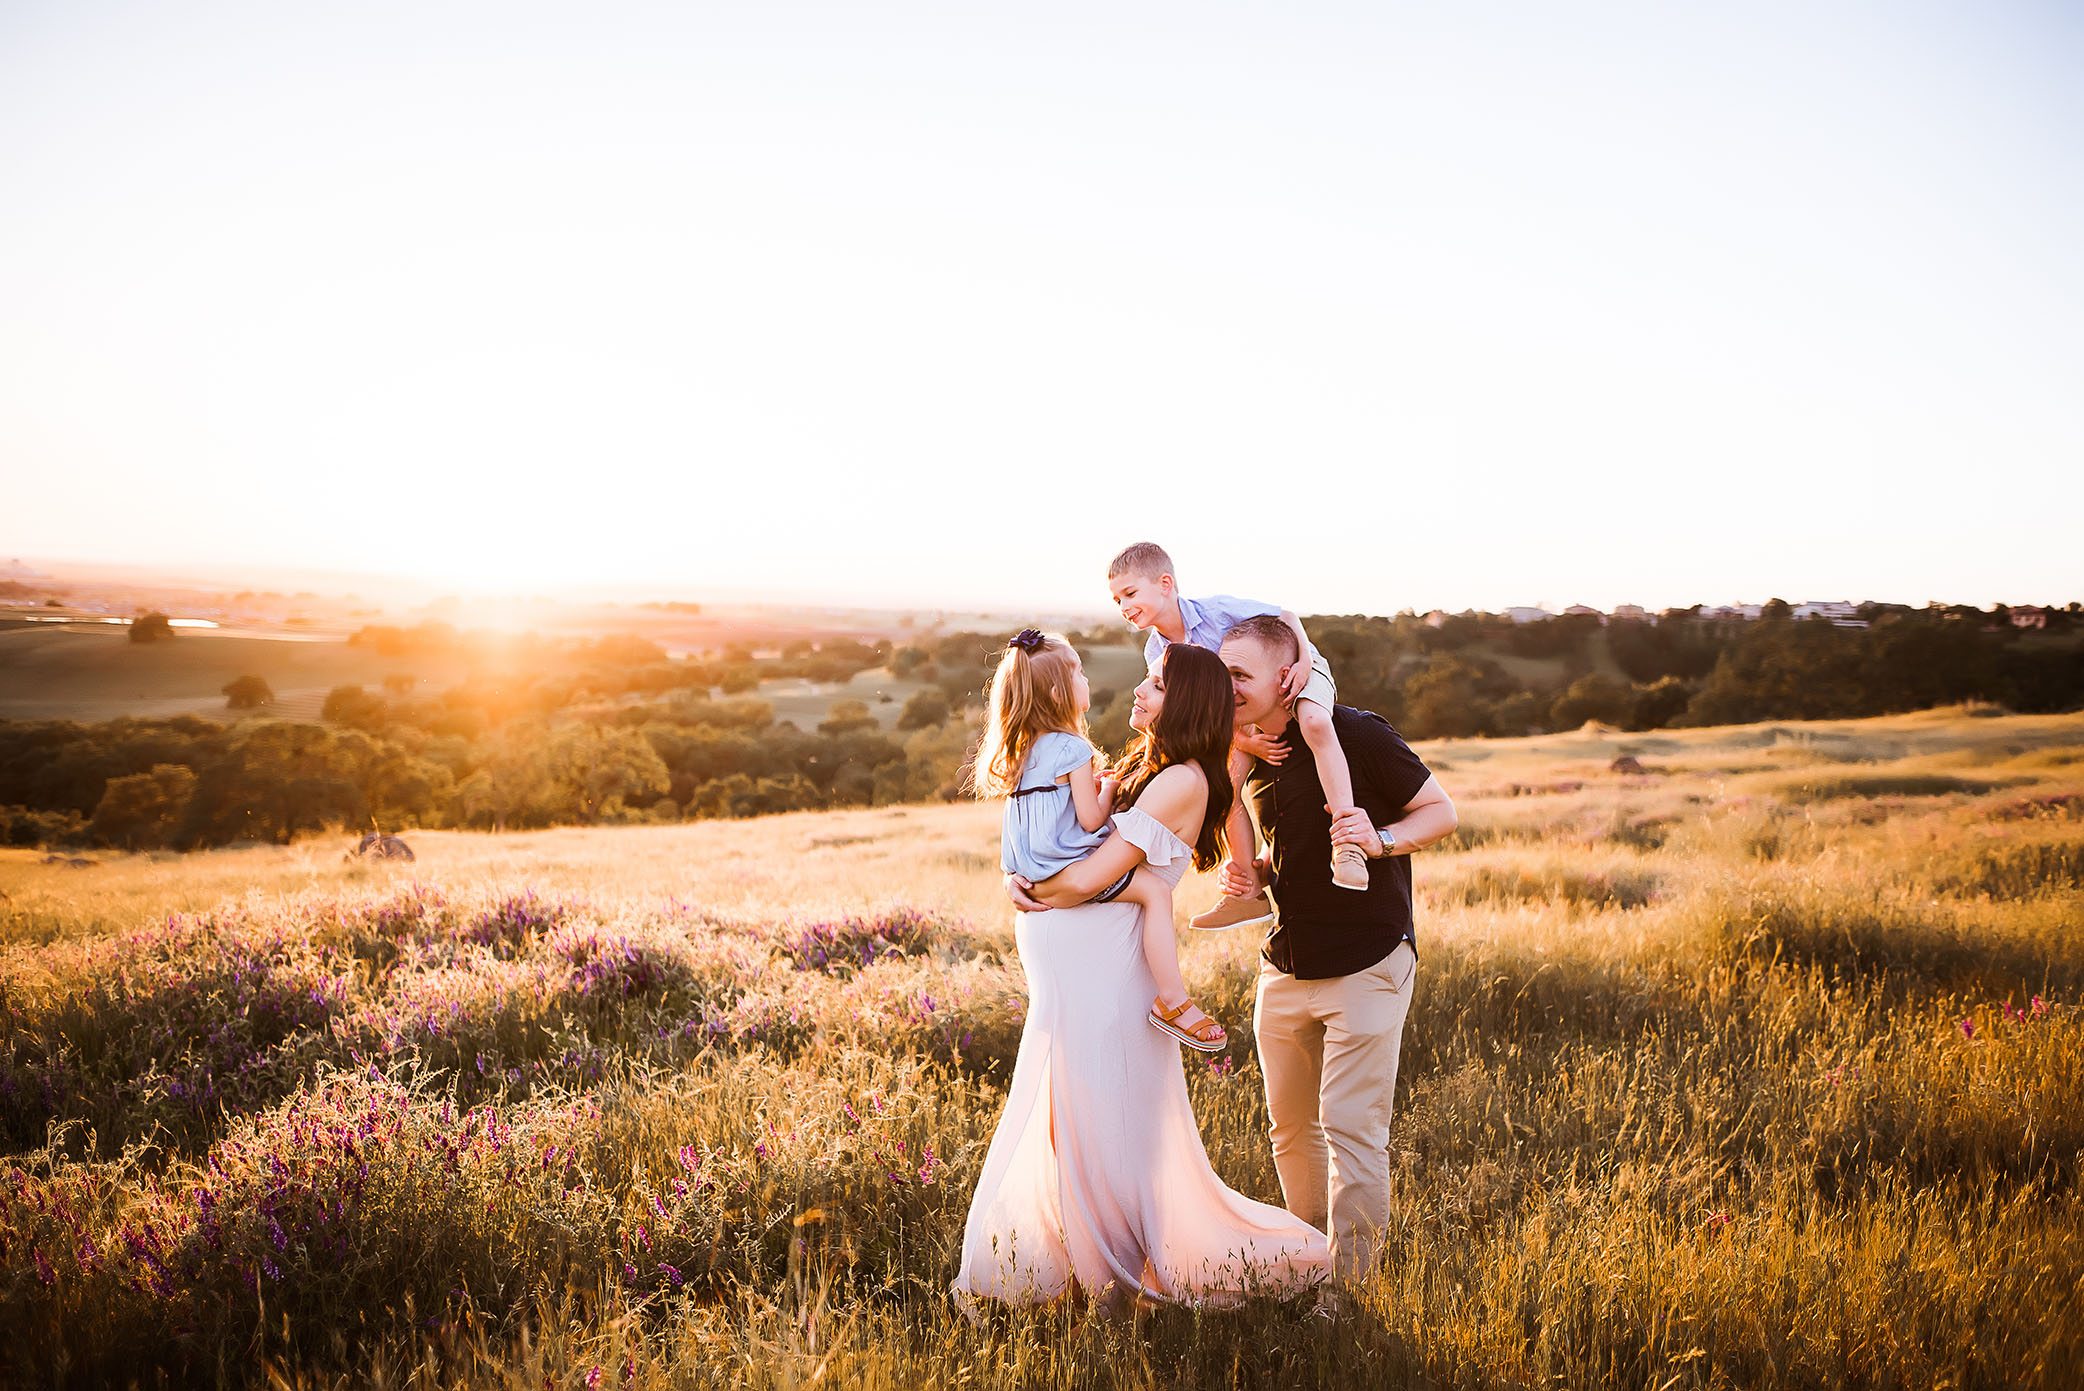 Family posed on a hill in the sunset captured by Sweet Beginnings Photography by Stephanie